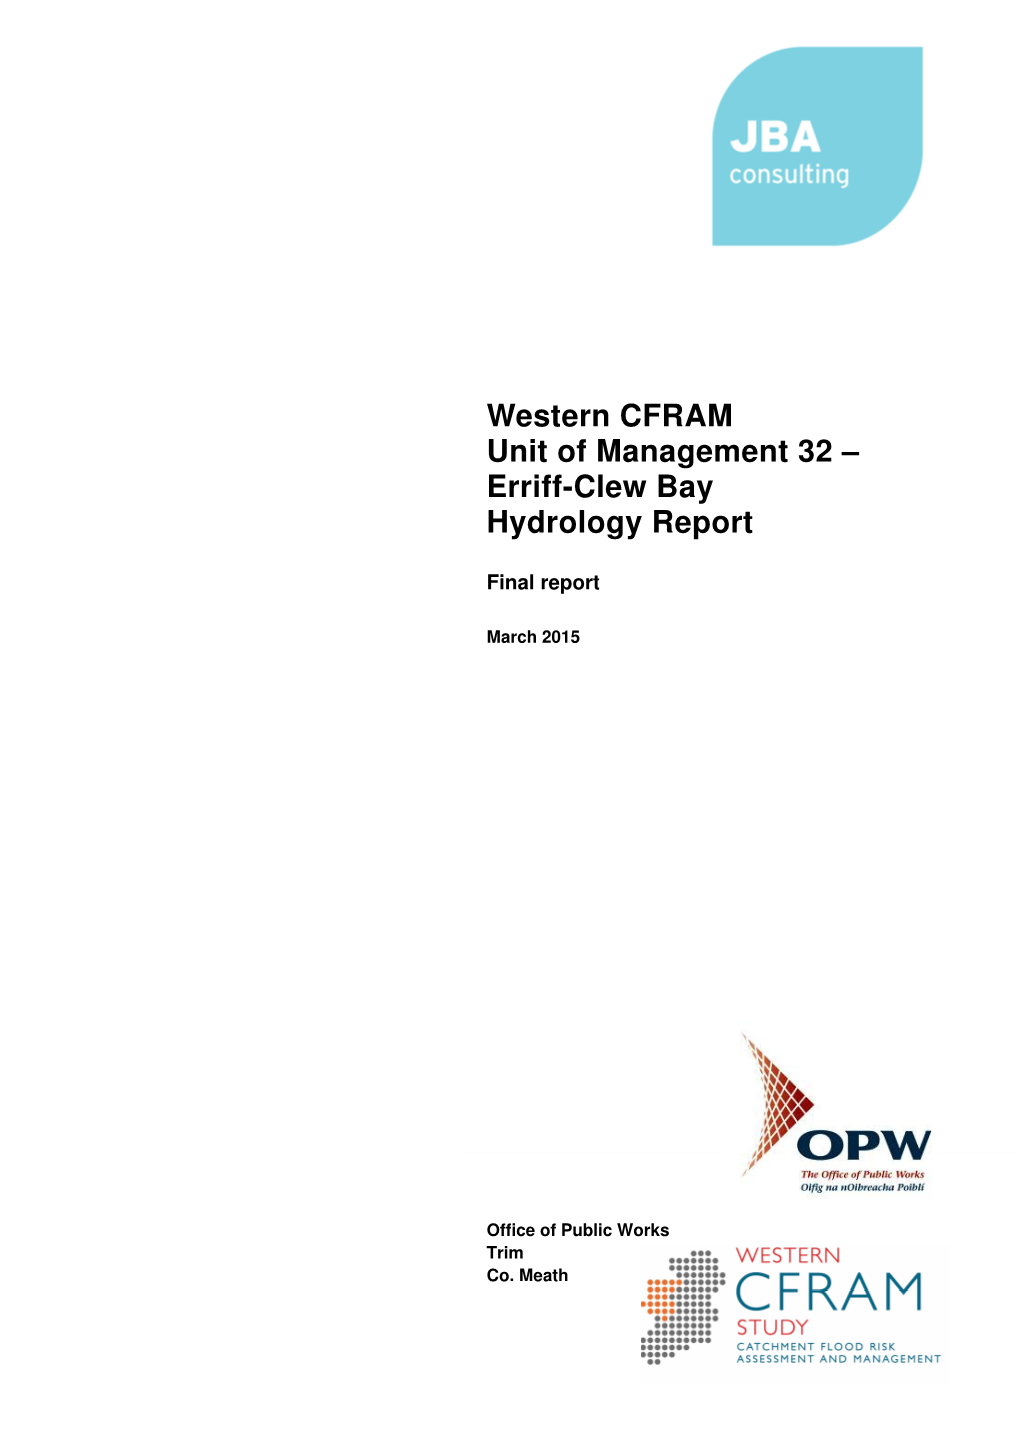 Western CFRAM Unit of Management 32 – Erriff-Clew Bay Hydrology Report